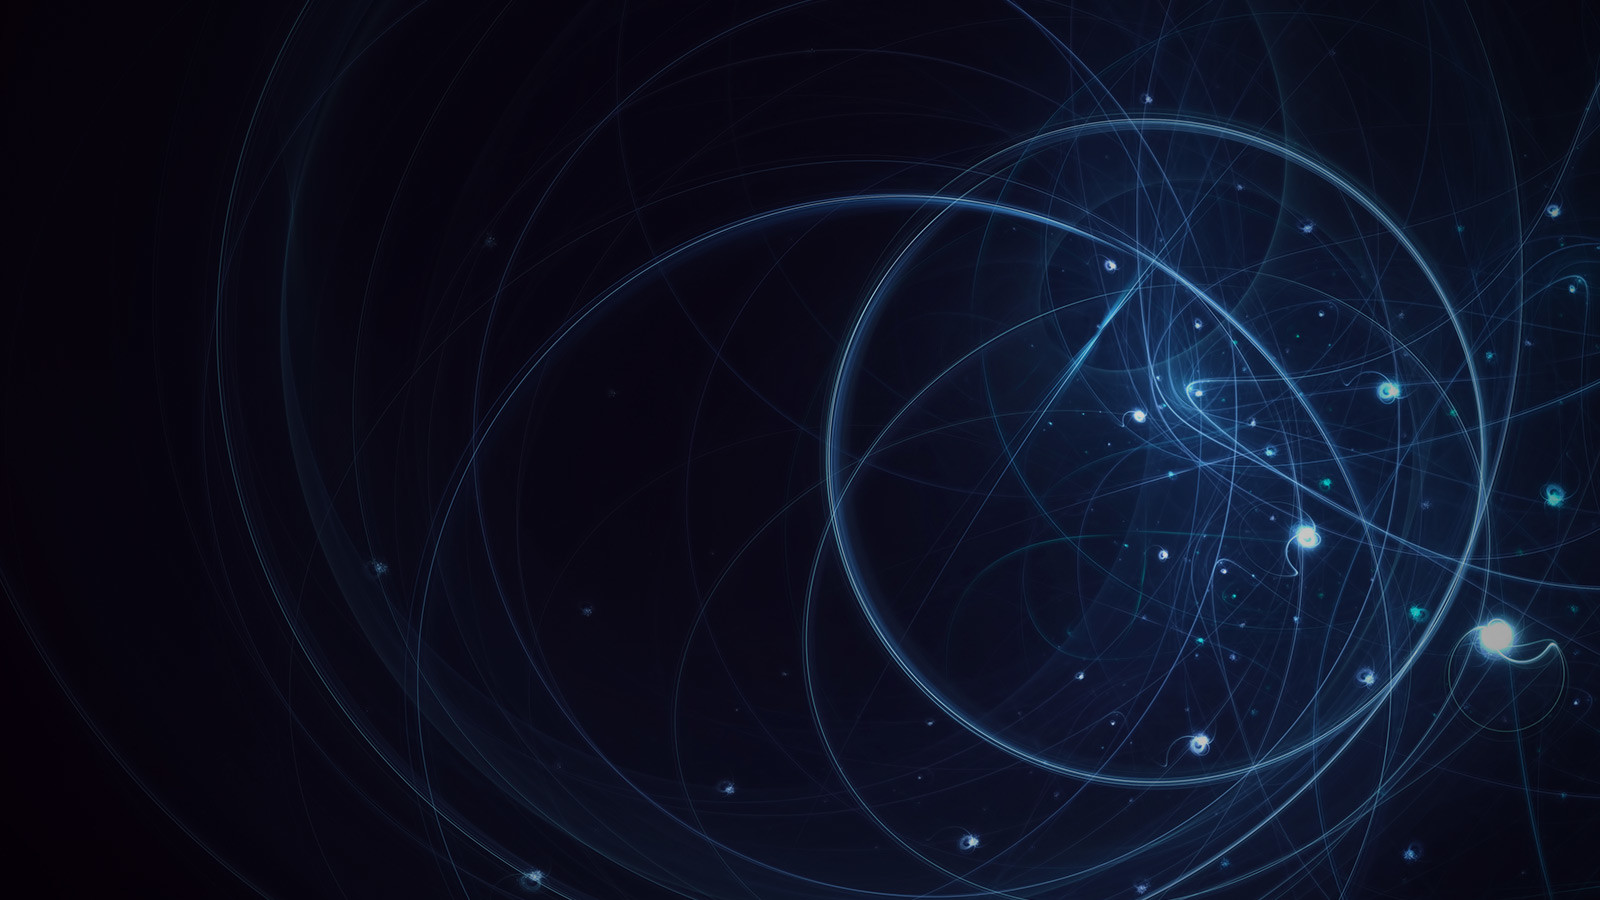 Abstract dark background with blue swirling lines and small bright blue orbs